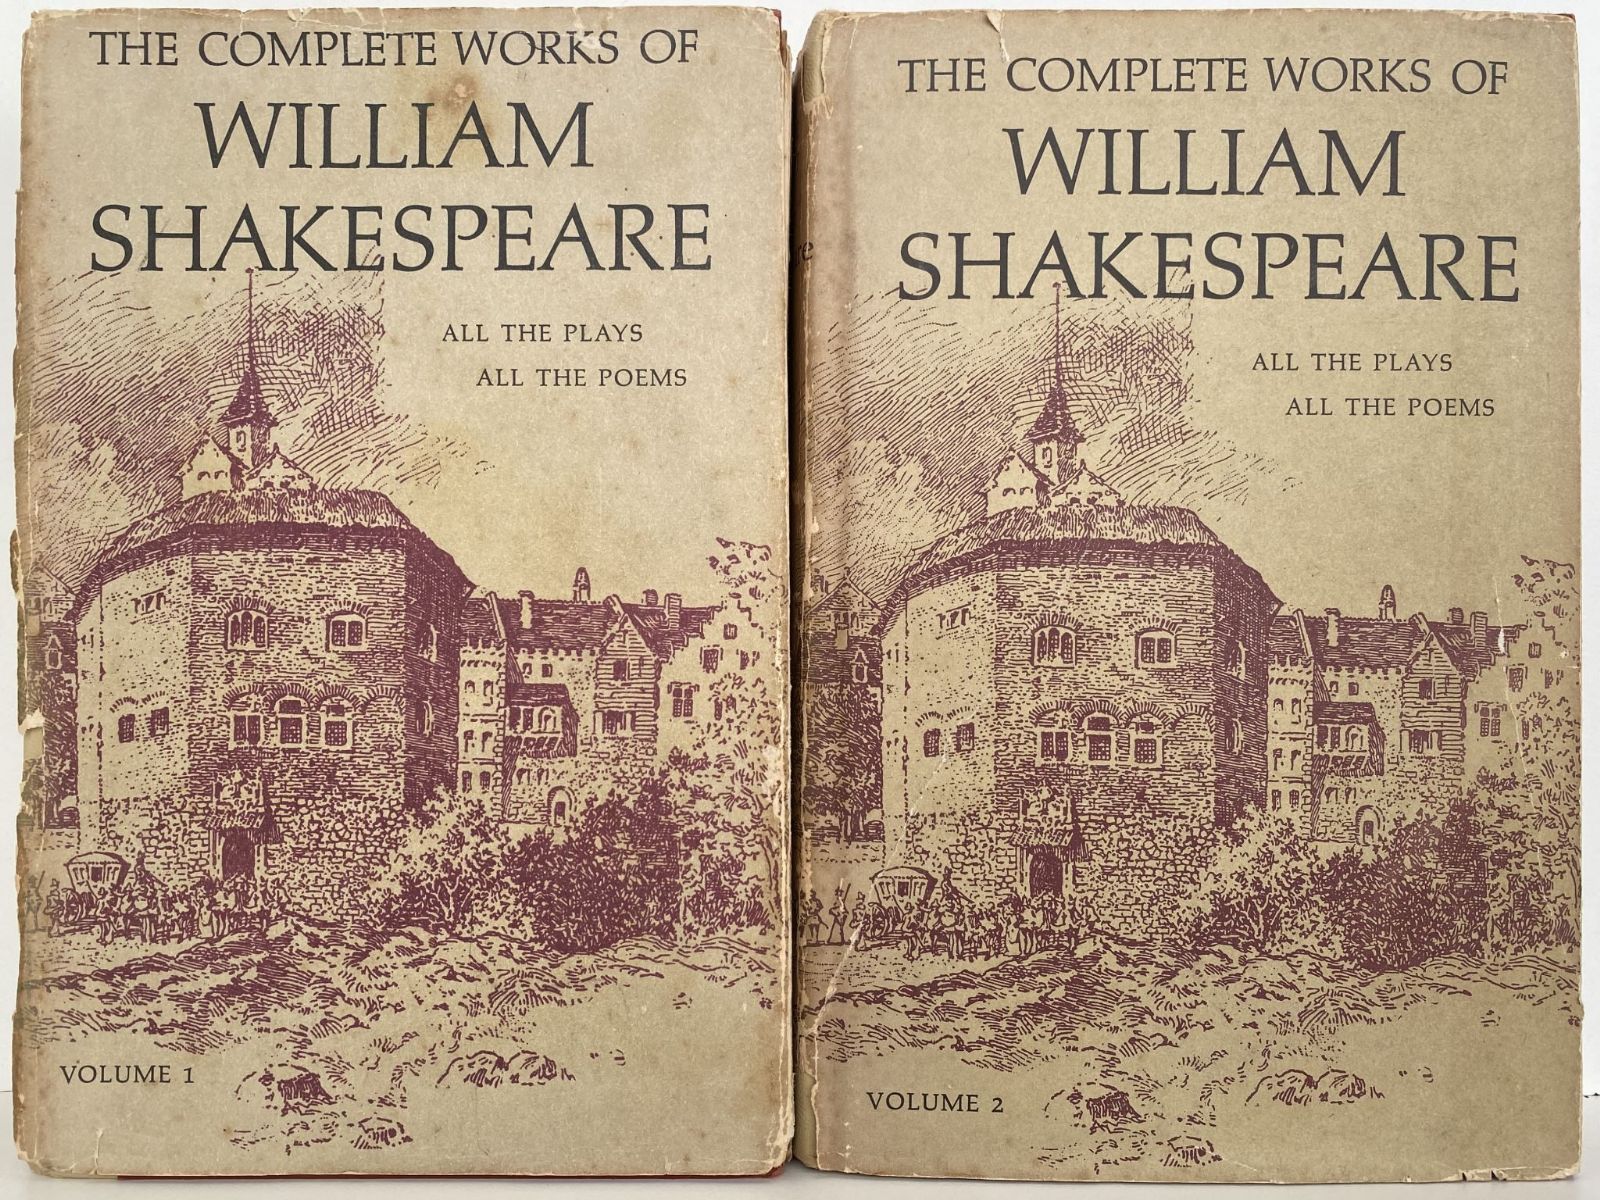 WILLIAM SHAKESPEARE: The Complete Works